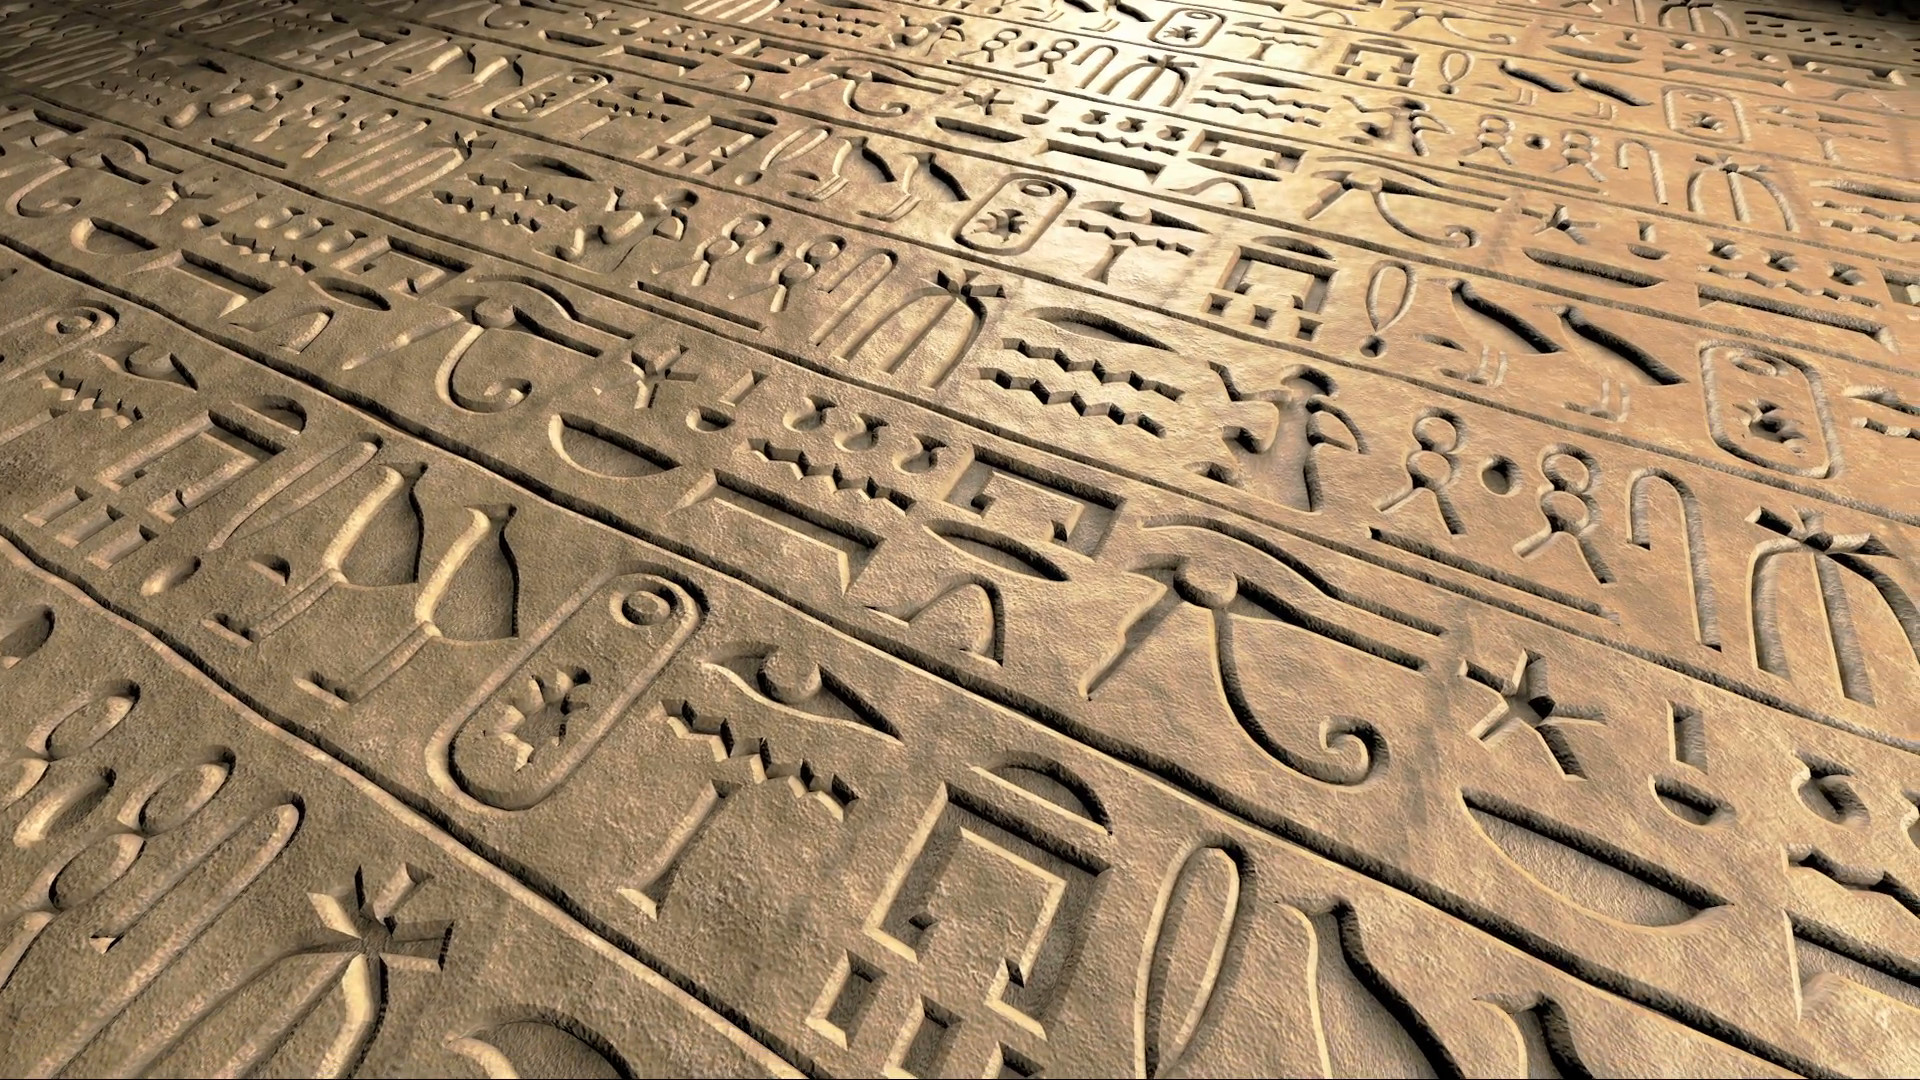 161 Egyptian Hieroglyphics Wallpaper Photos and Premium High Res Pictures   Getty Images